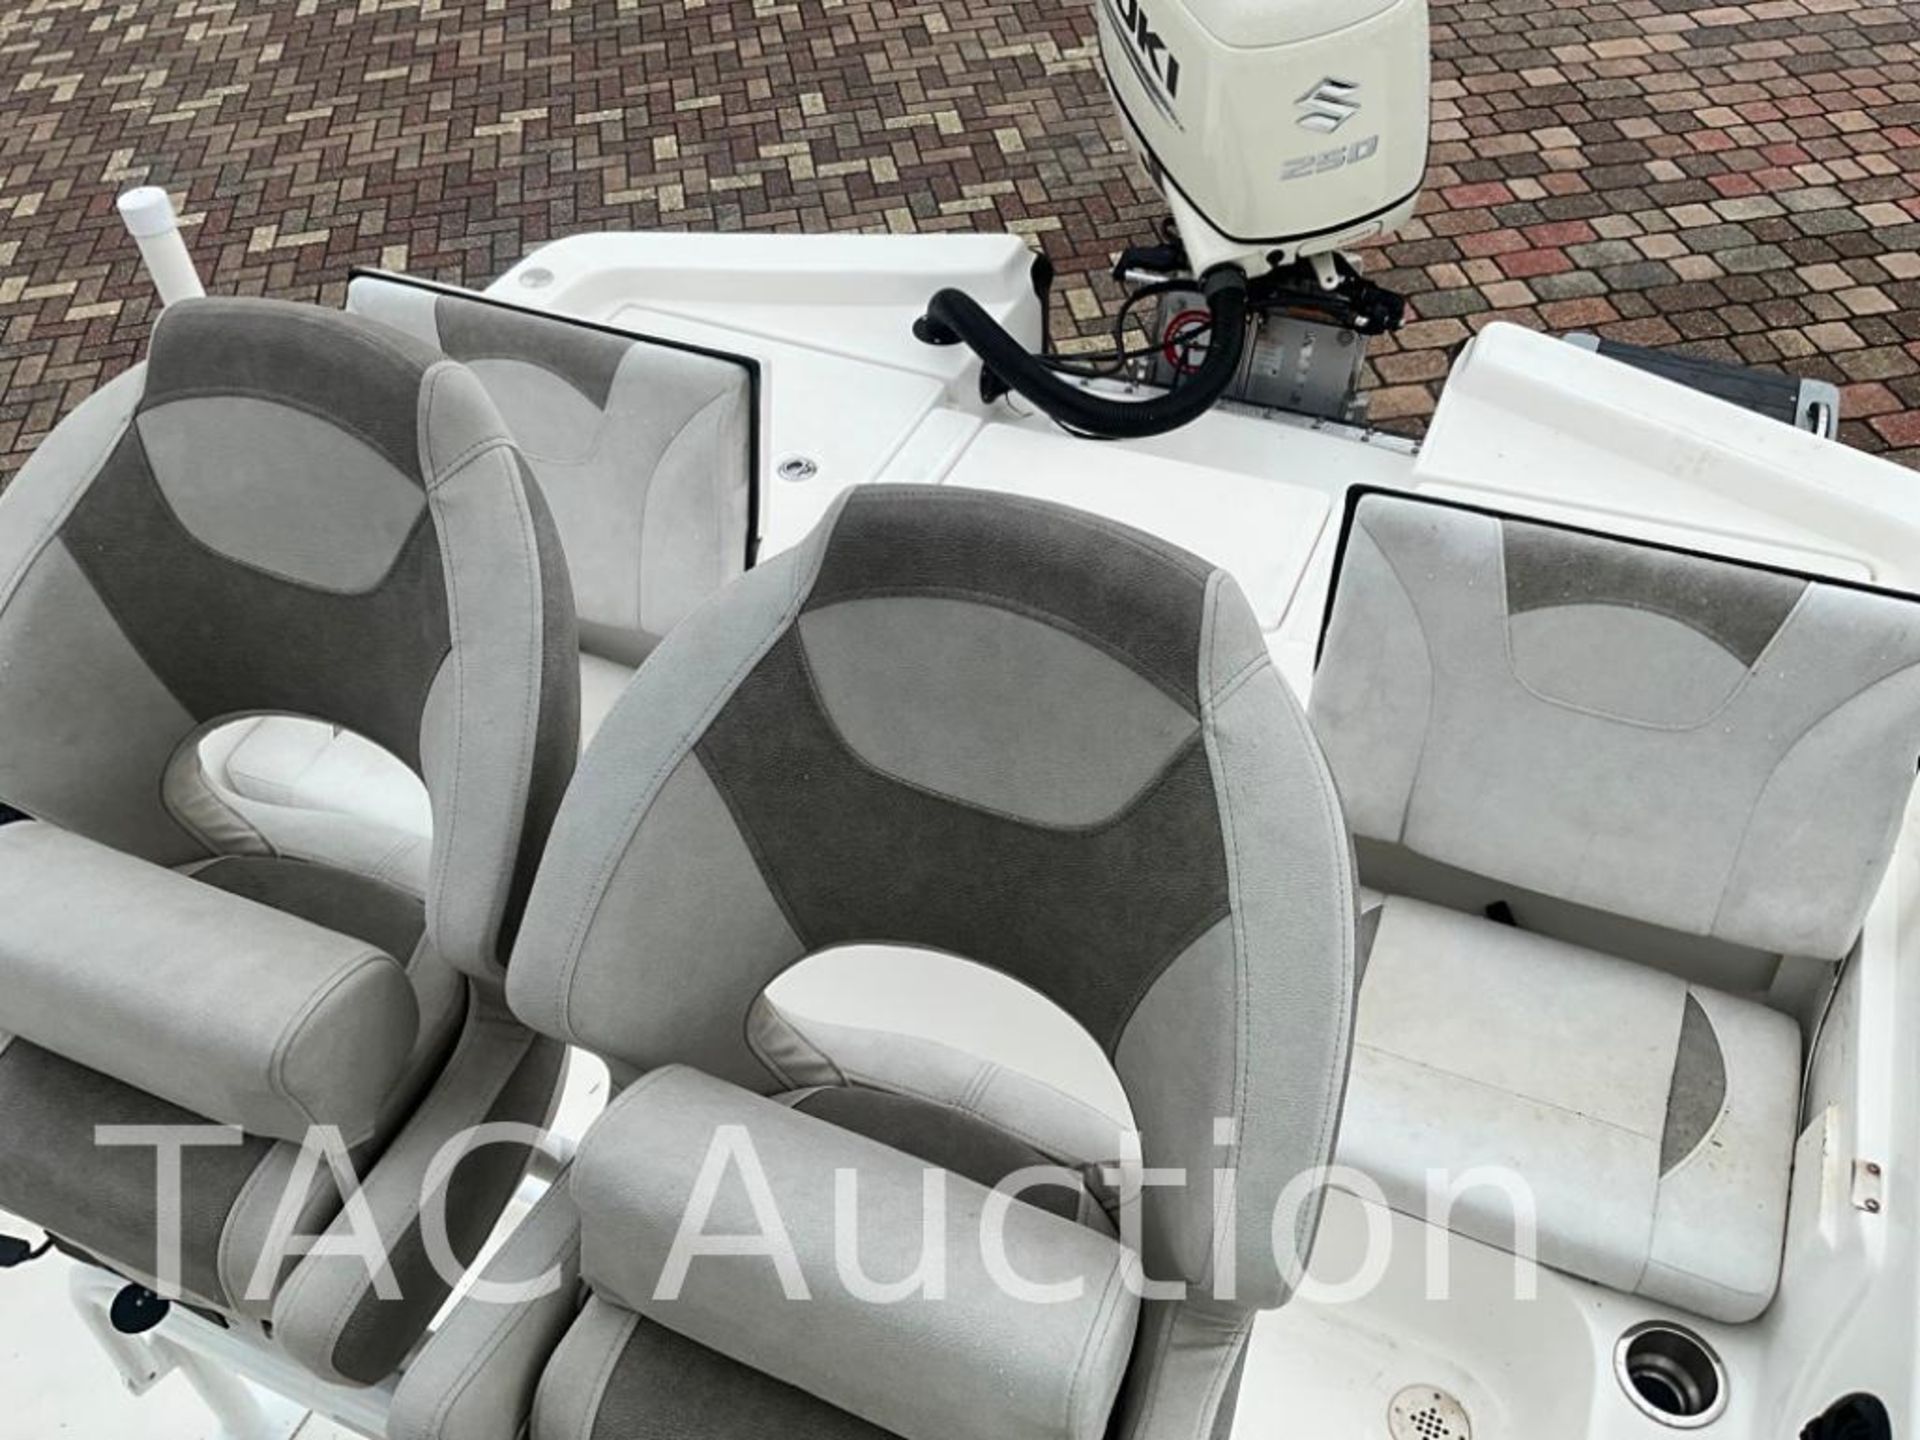 2019 Epic 24ft Bay Center Console - Image 19 of 48